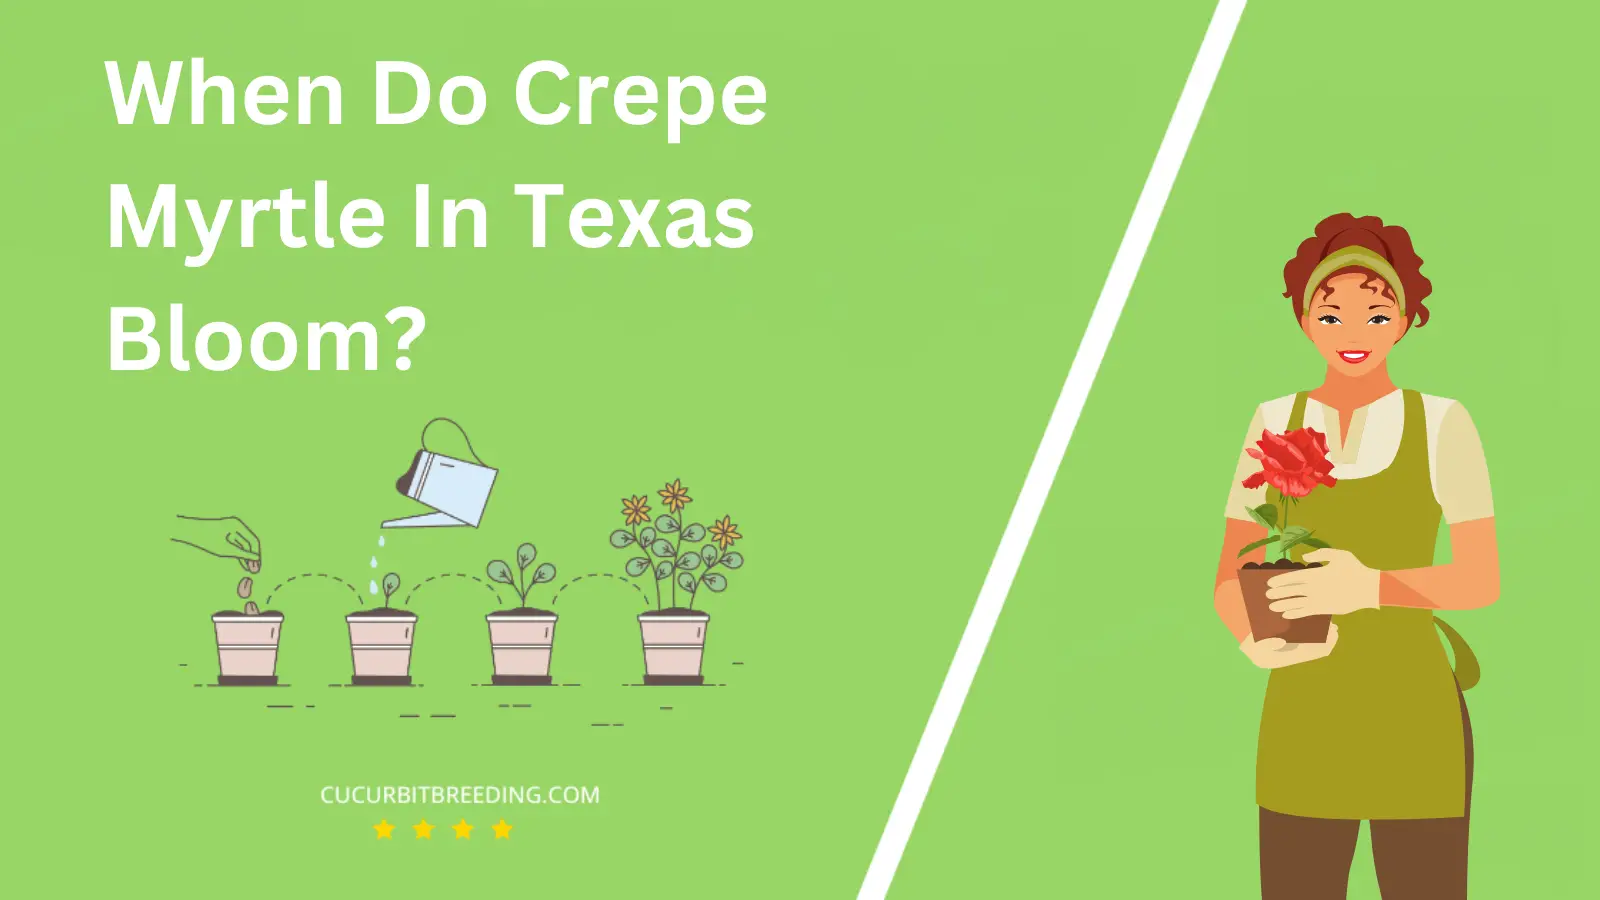 When Do Crepe Myrtle In Texas Bloom?